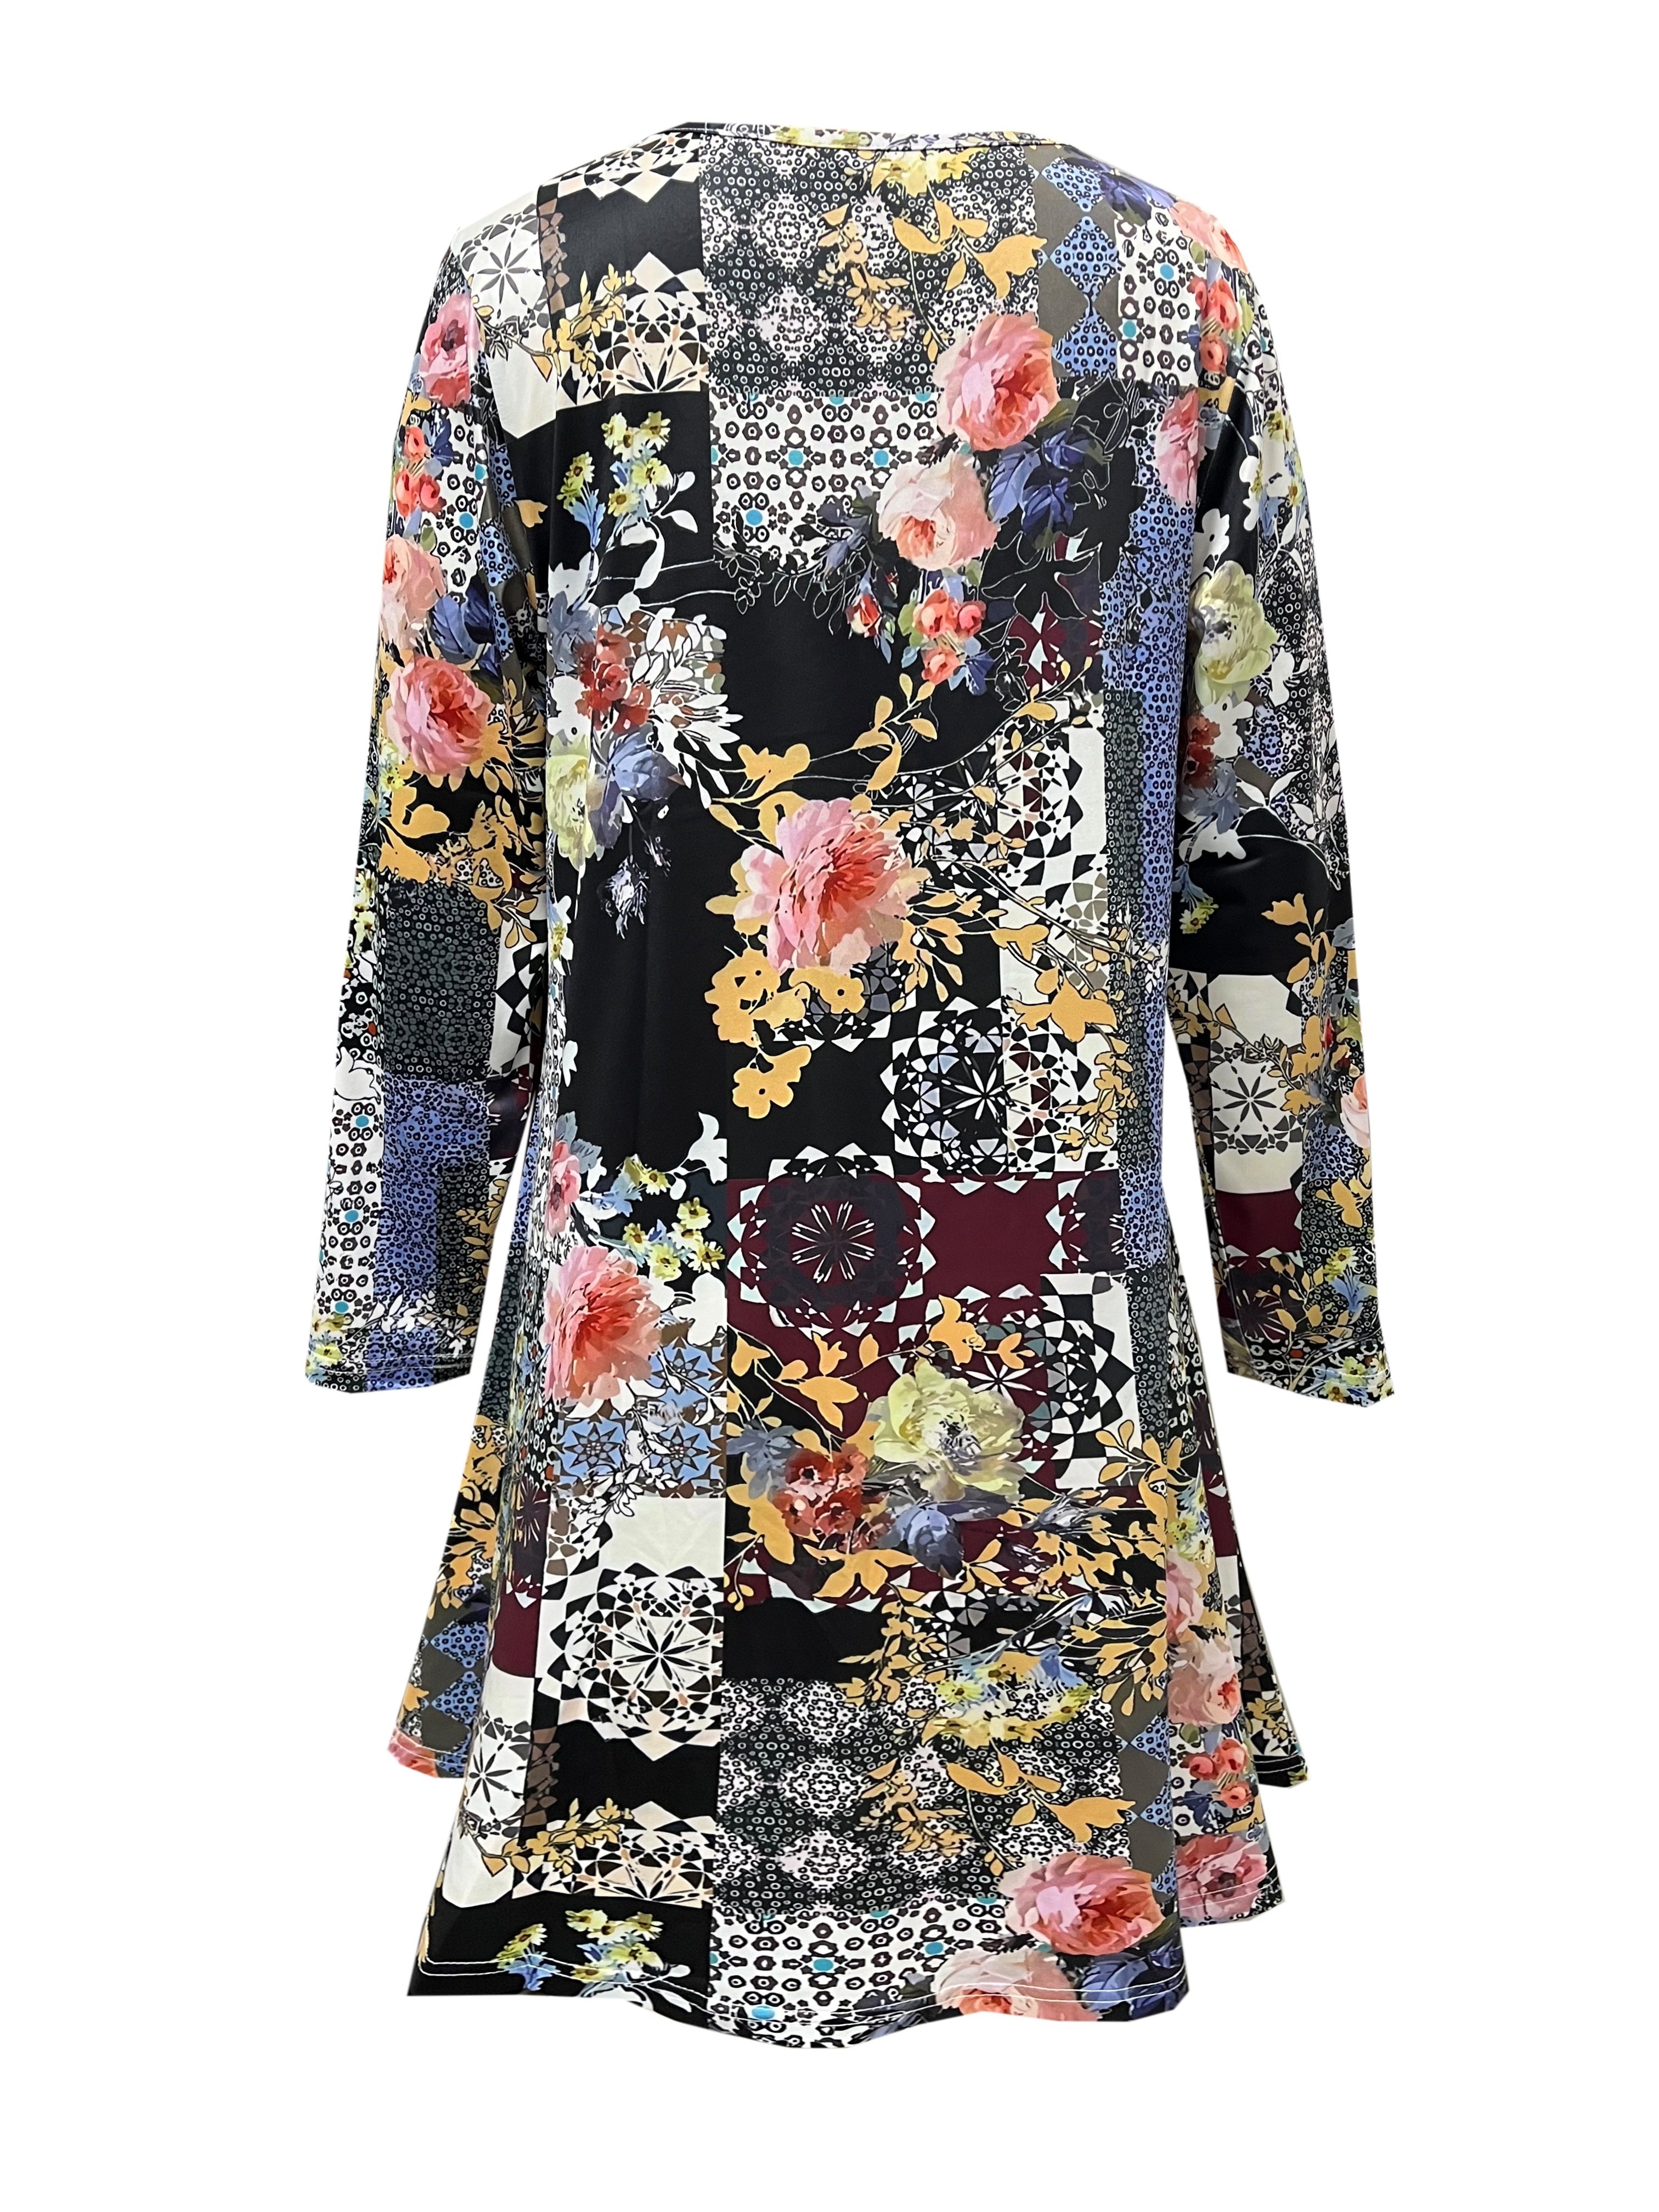 vintage floral print dress casual crew neck long sleeve dress womens clothing